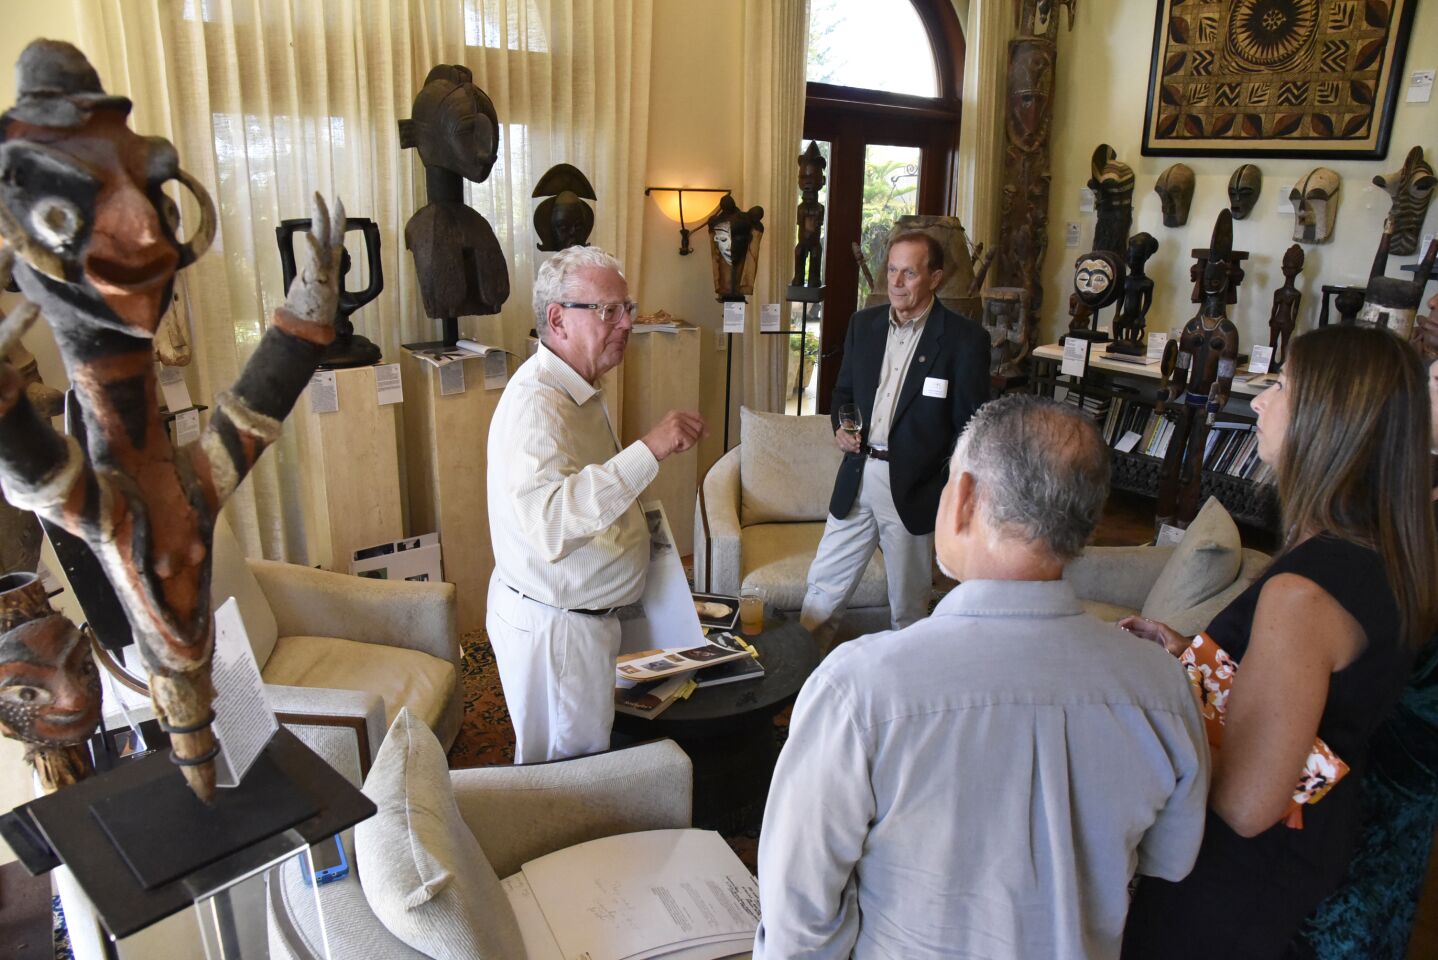 Host Bill Lerach treated guests to a tour of his art treasures